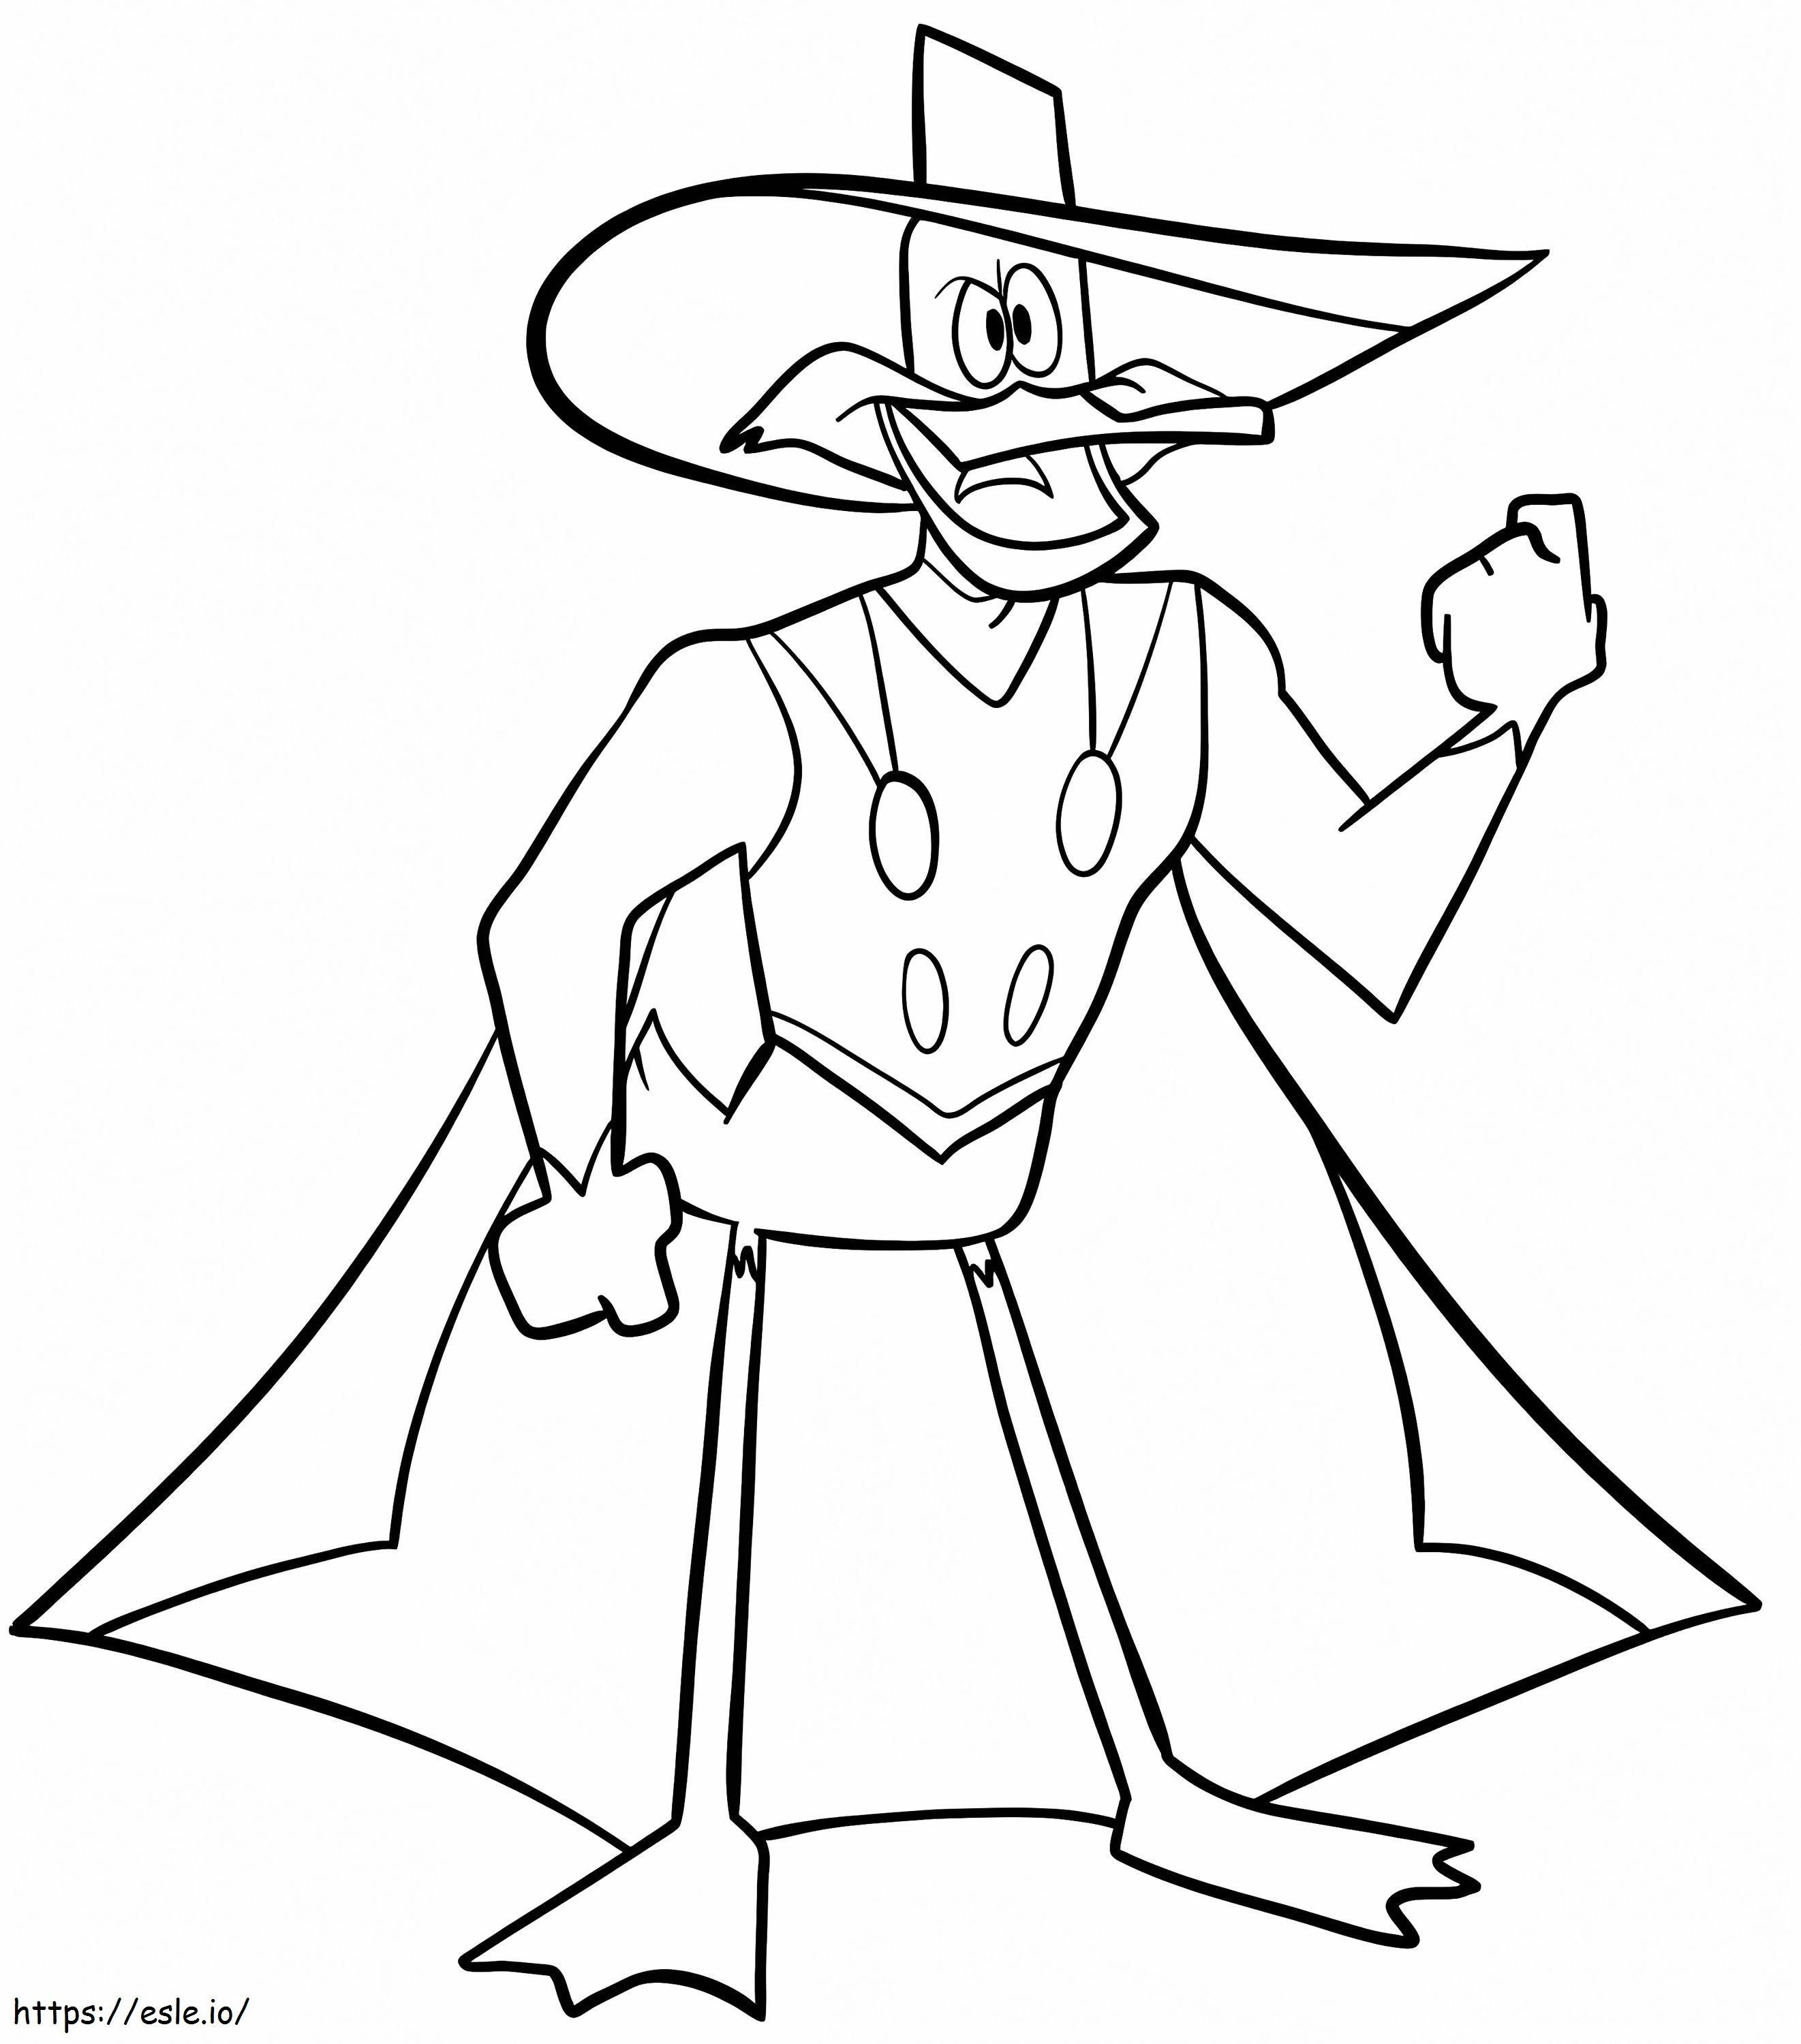 Darkwing Duck 2 coloring page